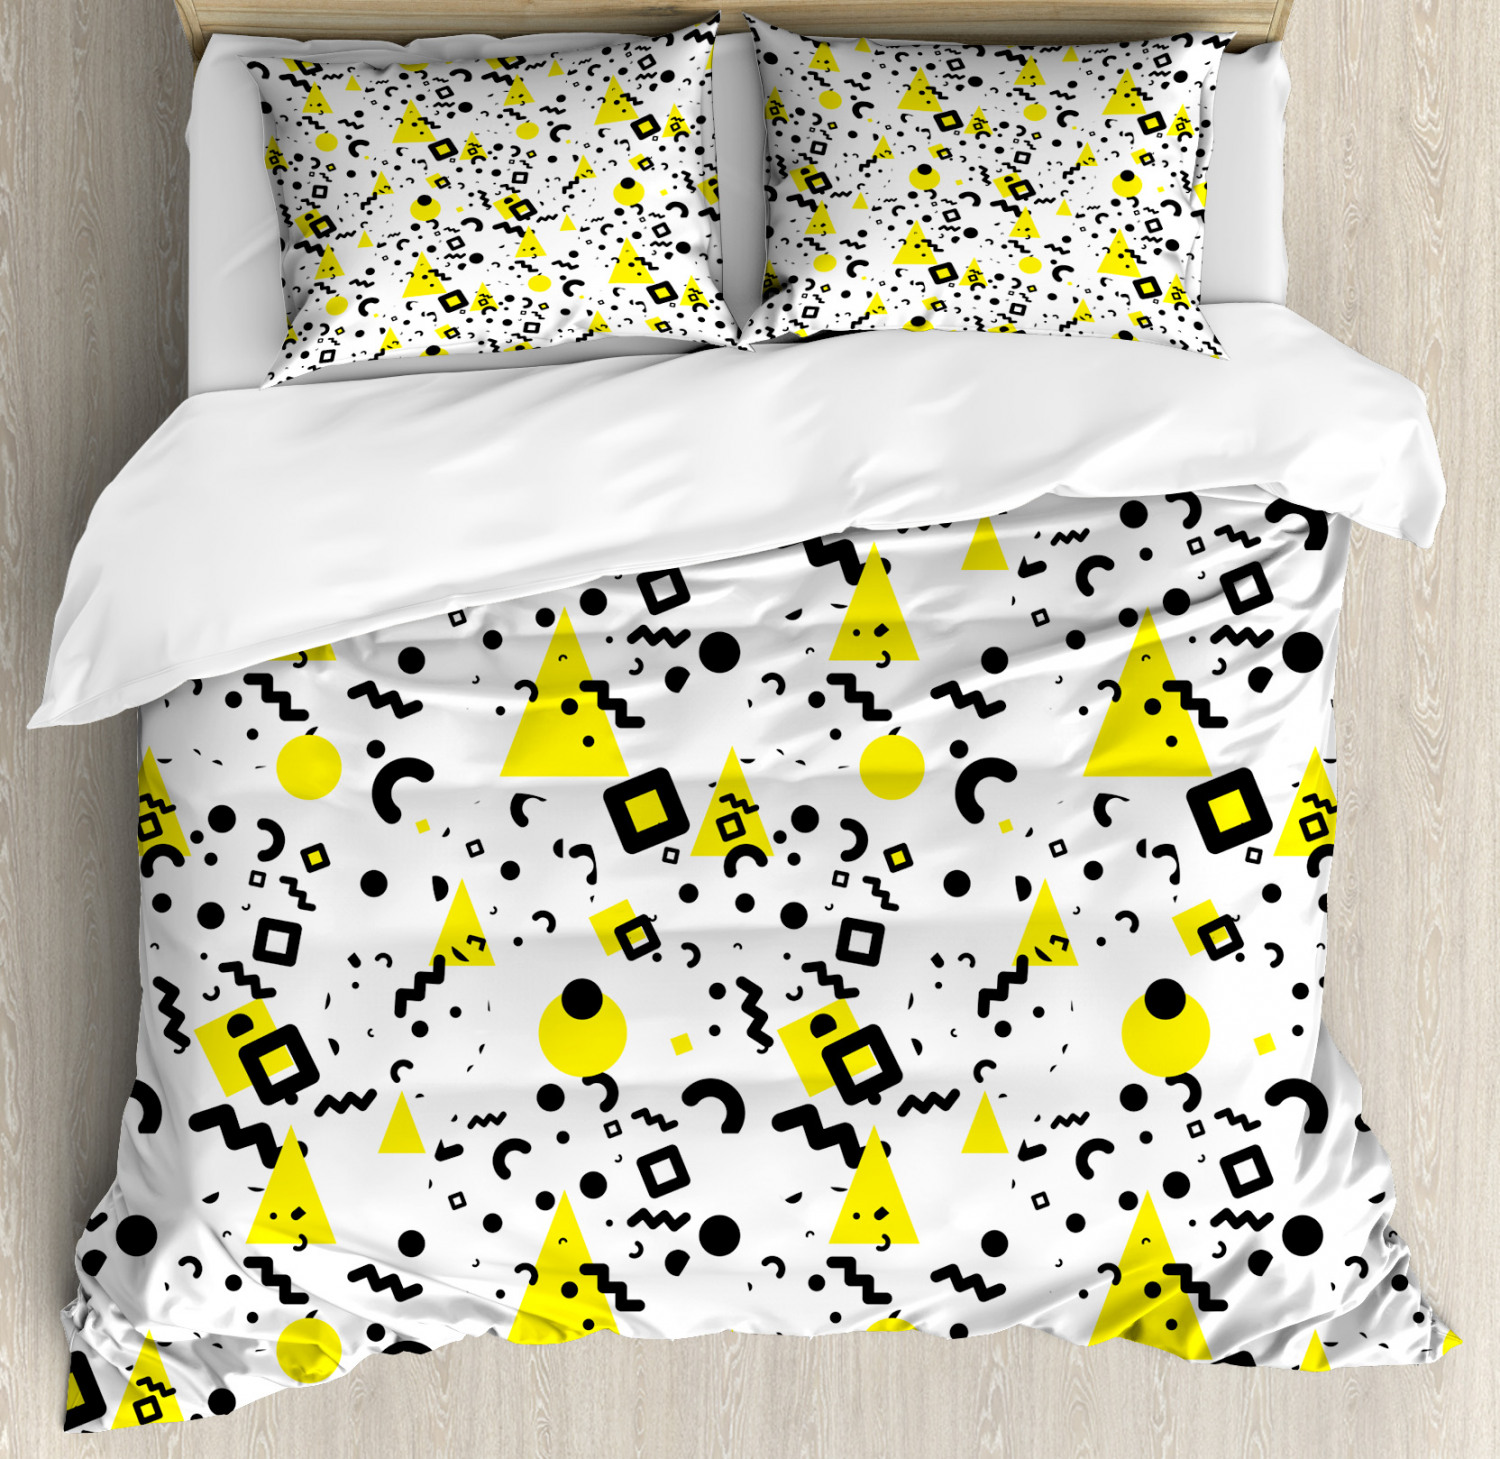 Black And Yellow Duvet Cover Set With Pillow Shams 80s Memphis